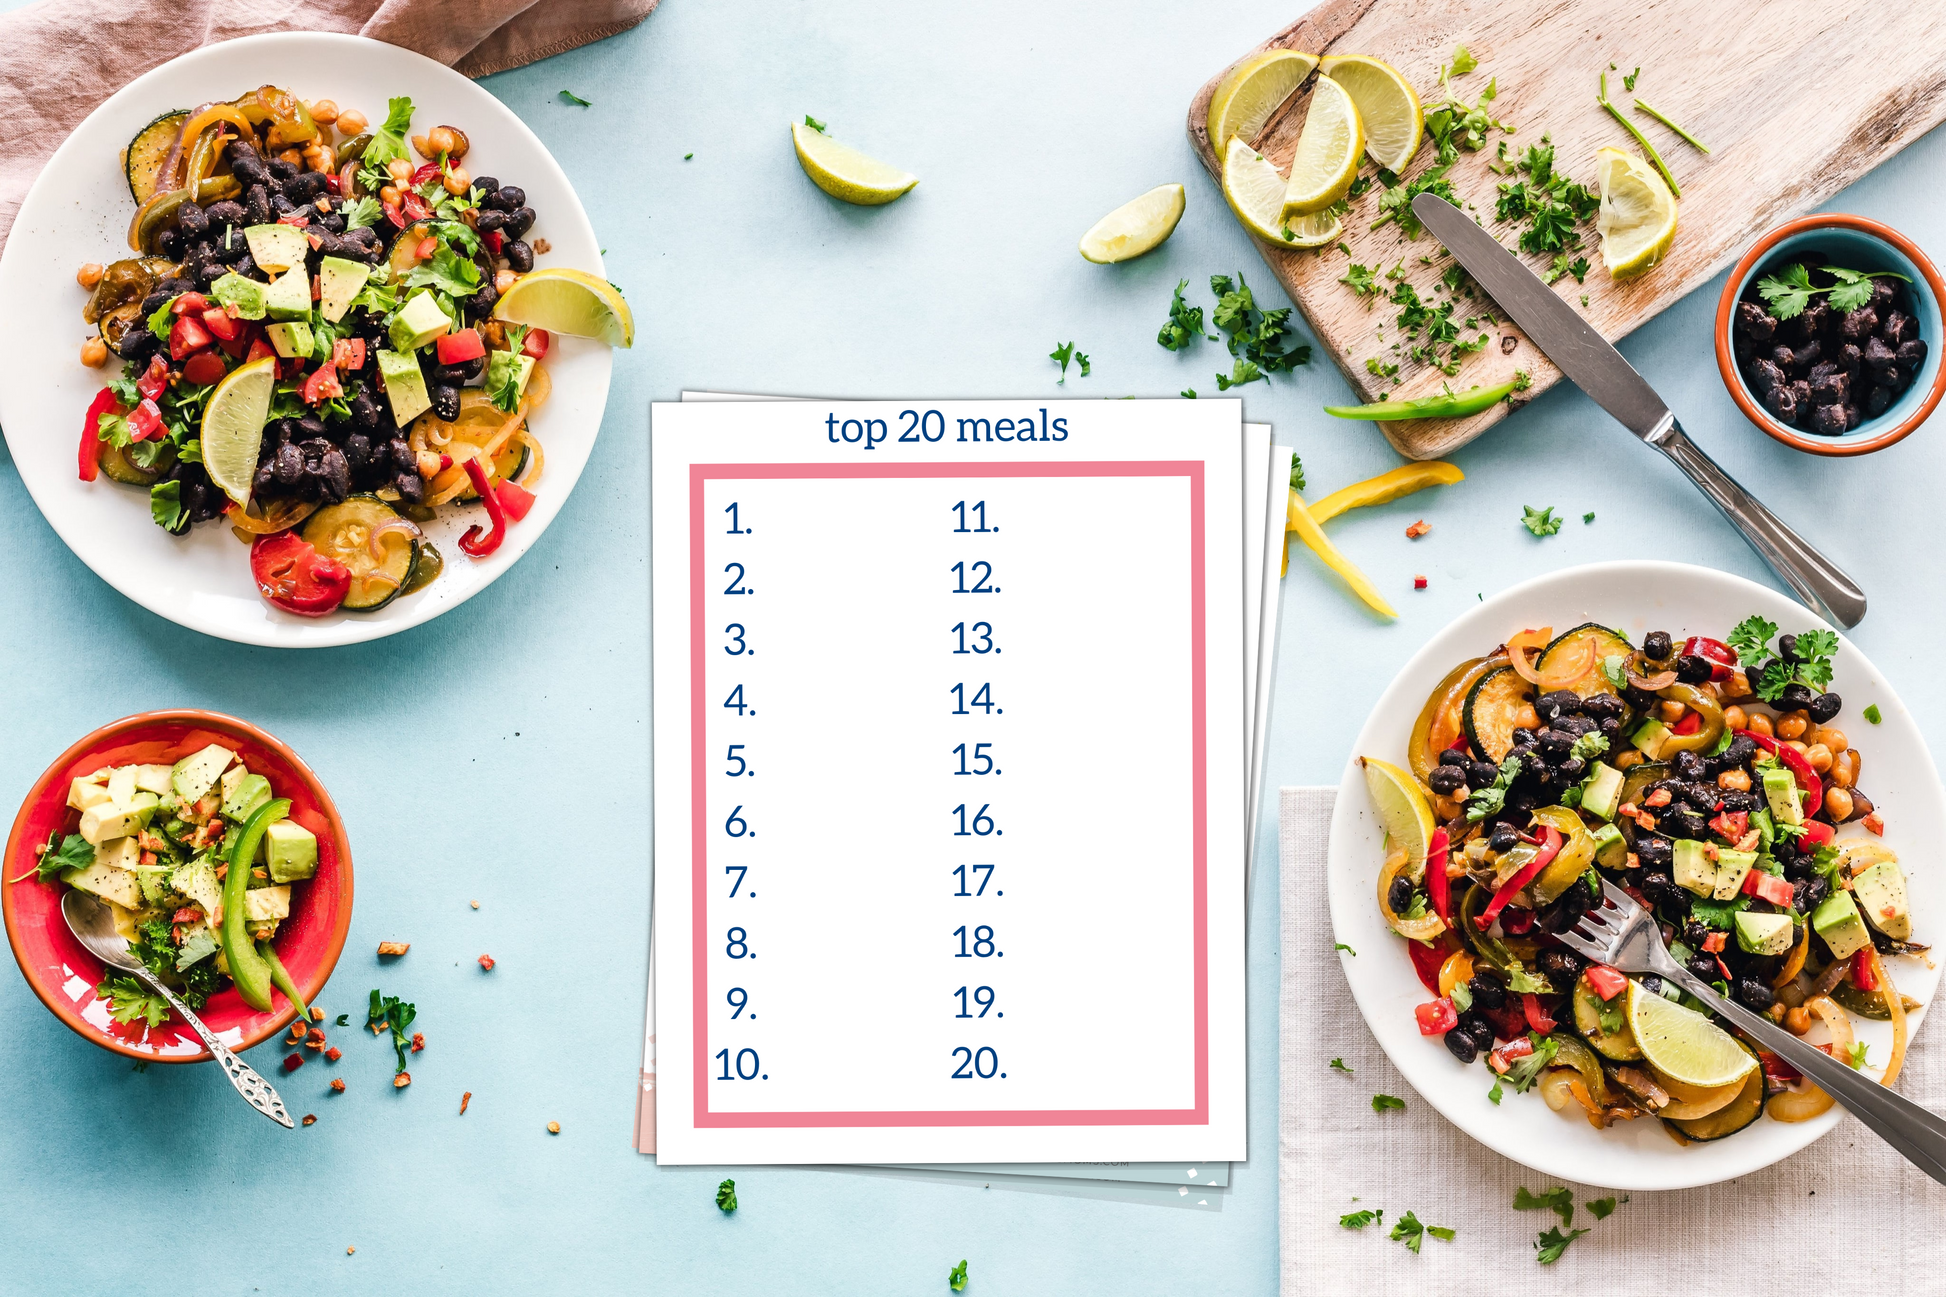 Top 20 meals mockup on table with delicious meals